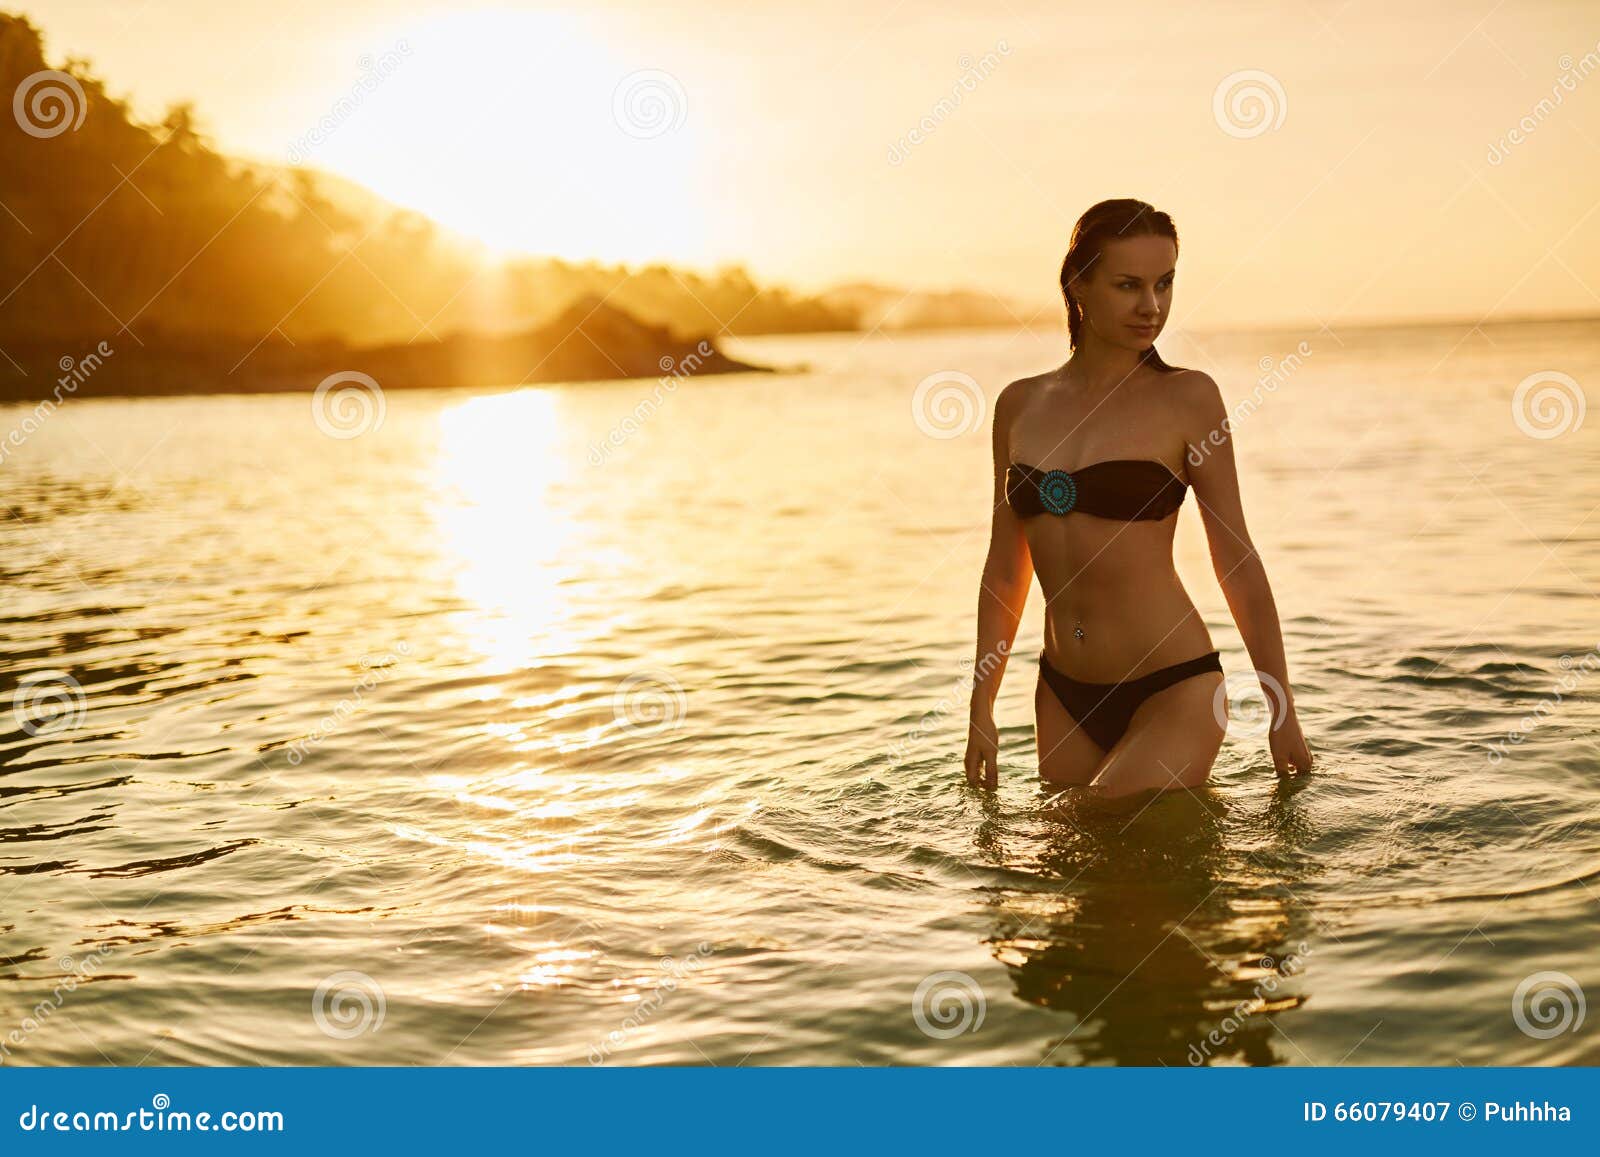 Healthy Lifestyle Woman Standing In Sea At Sunset Summer Vacations Stock Image Image Of Black Holidays 66079407